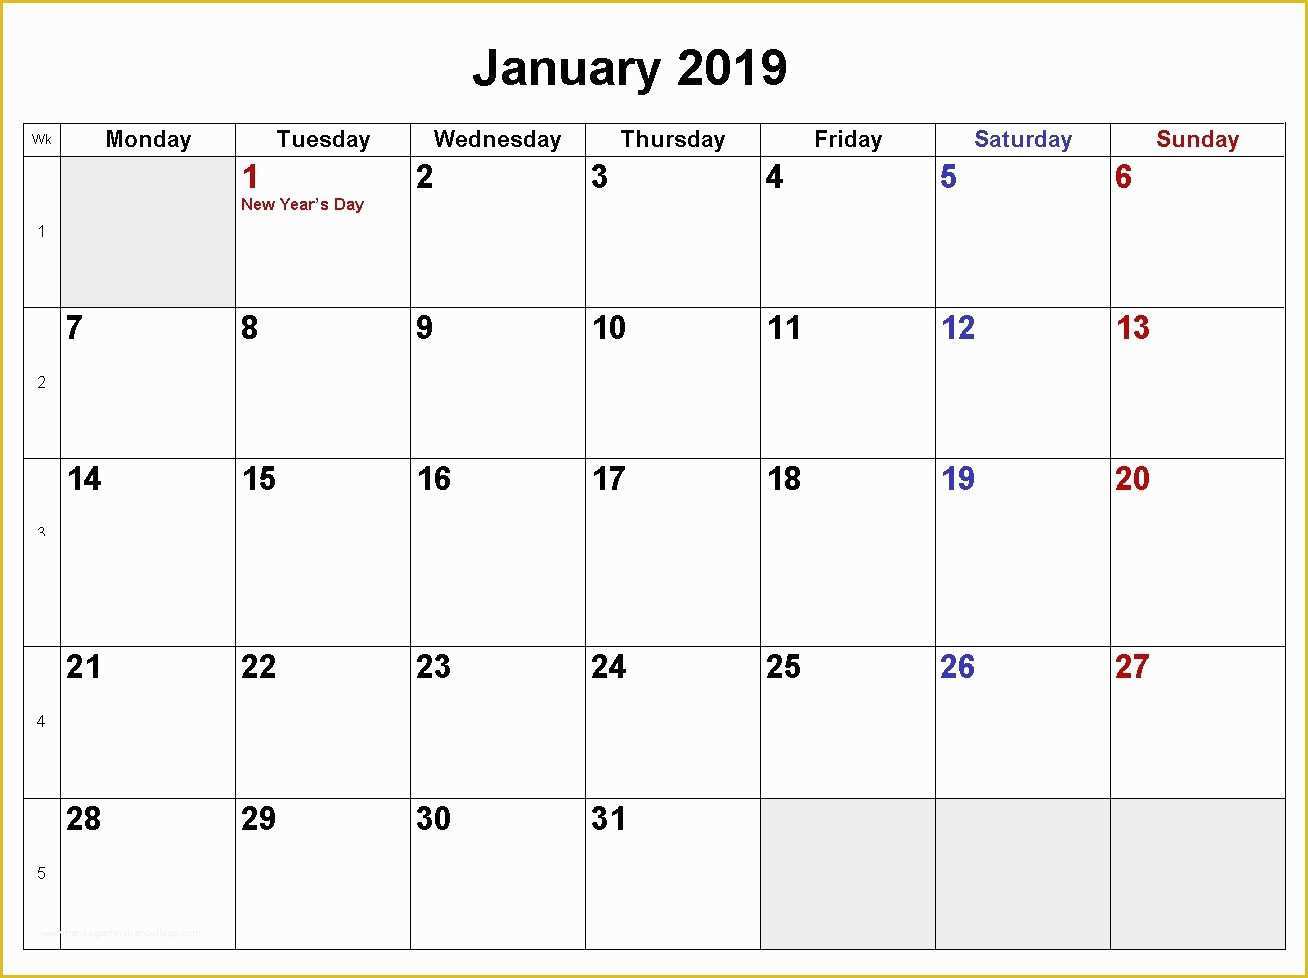 Free Calendar Template 2019 Of January 2019 Calendar Download In Word Excel Pdf formats